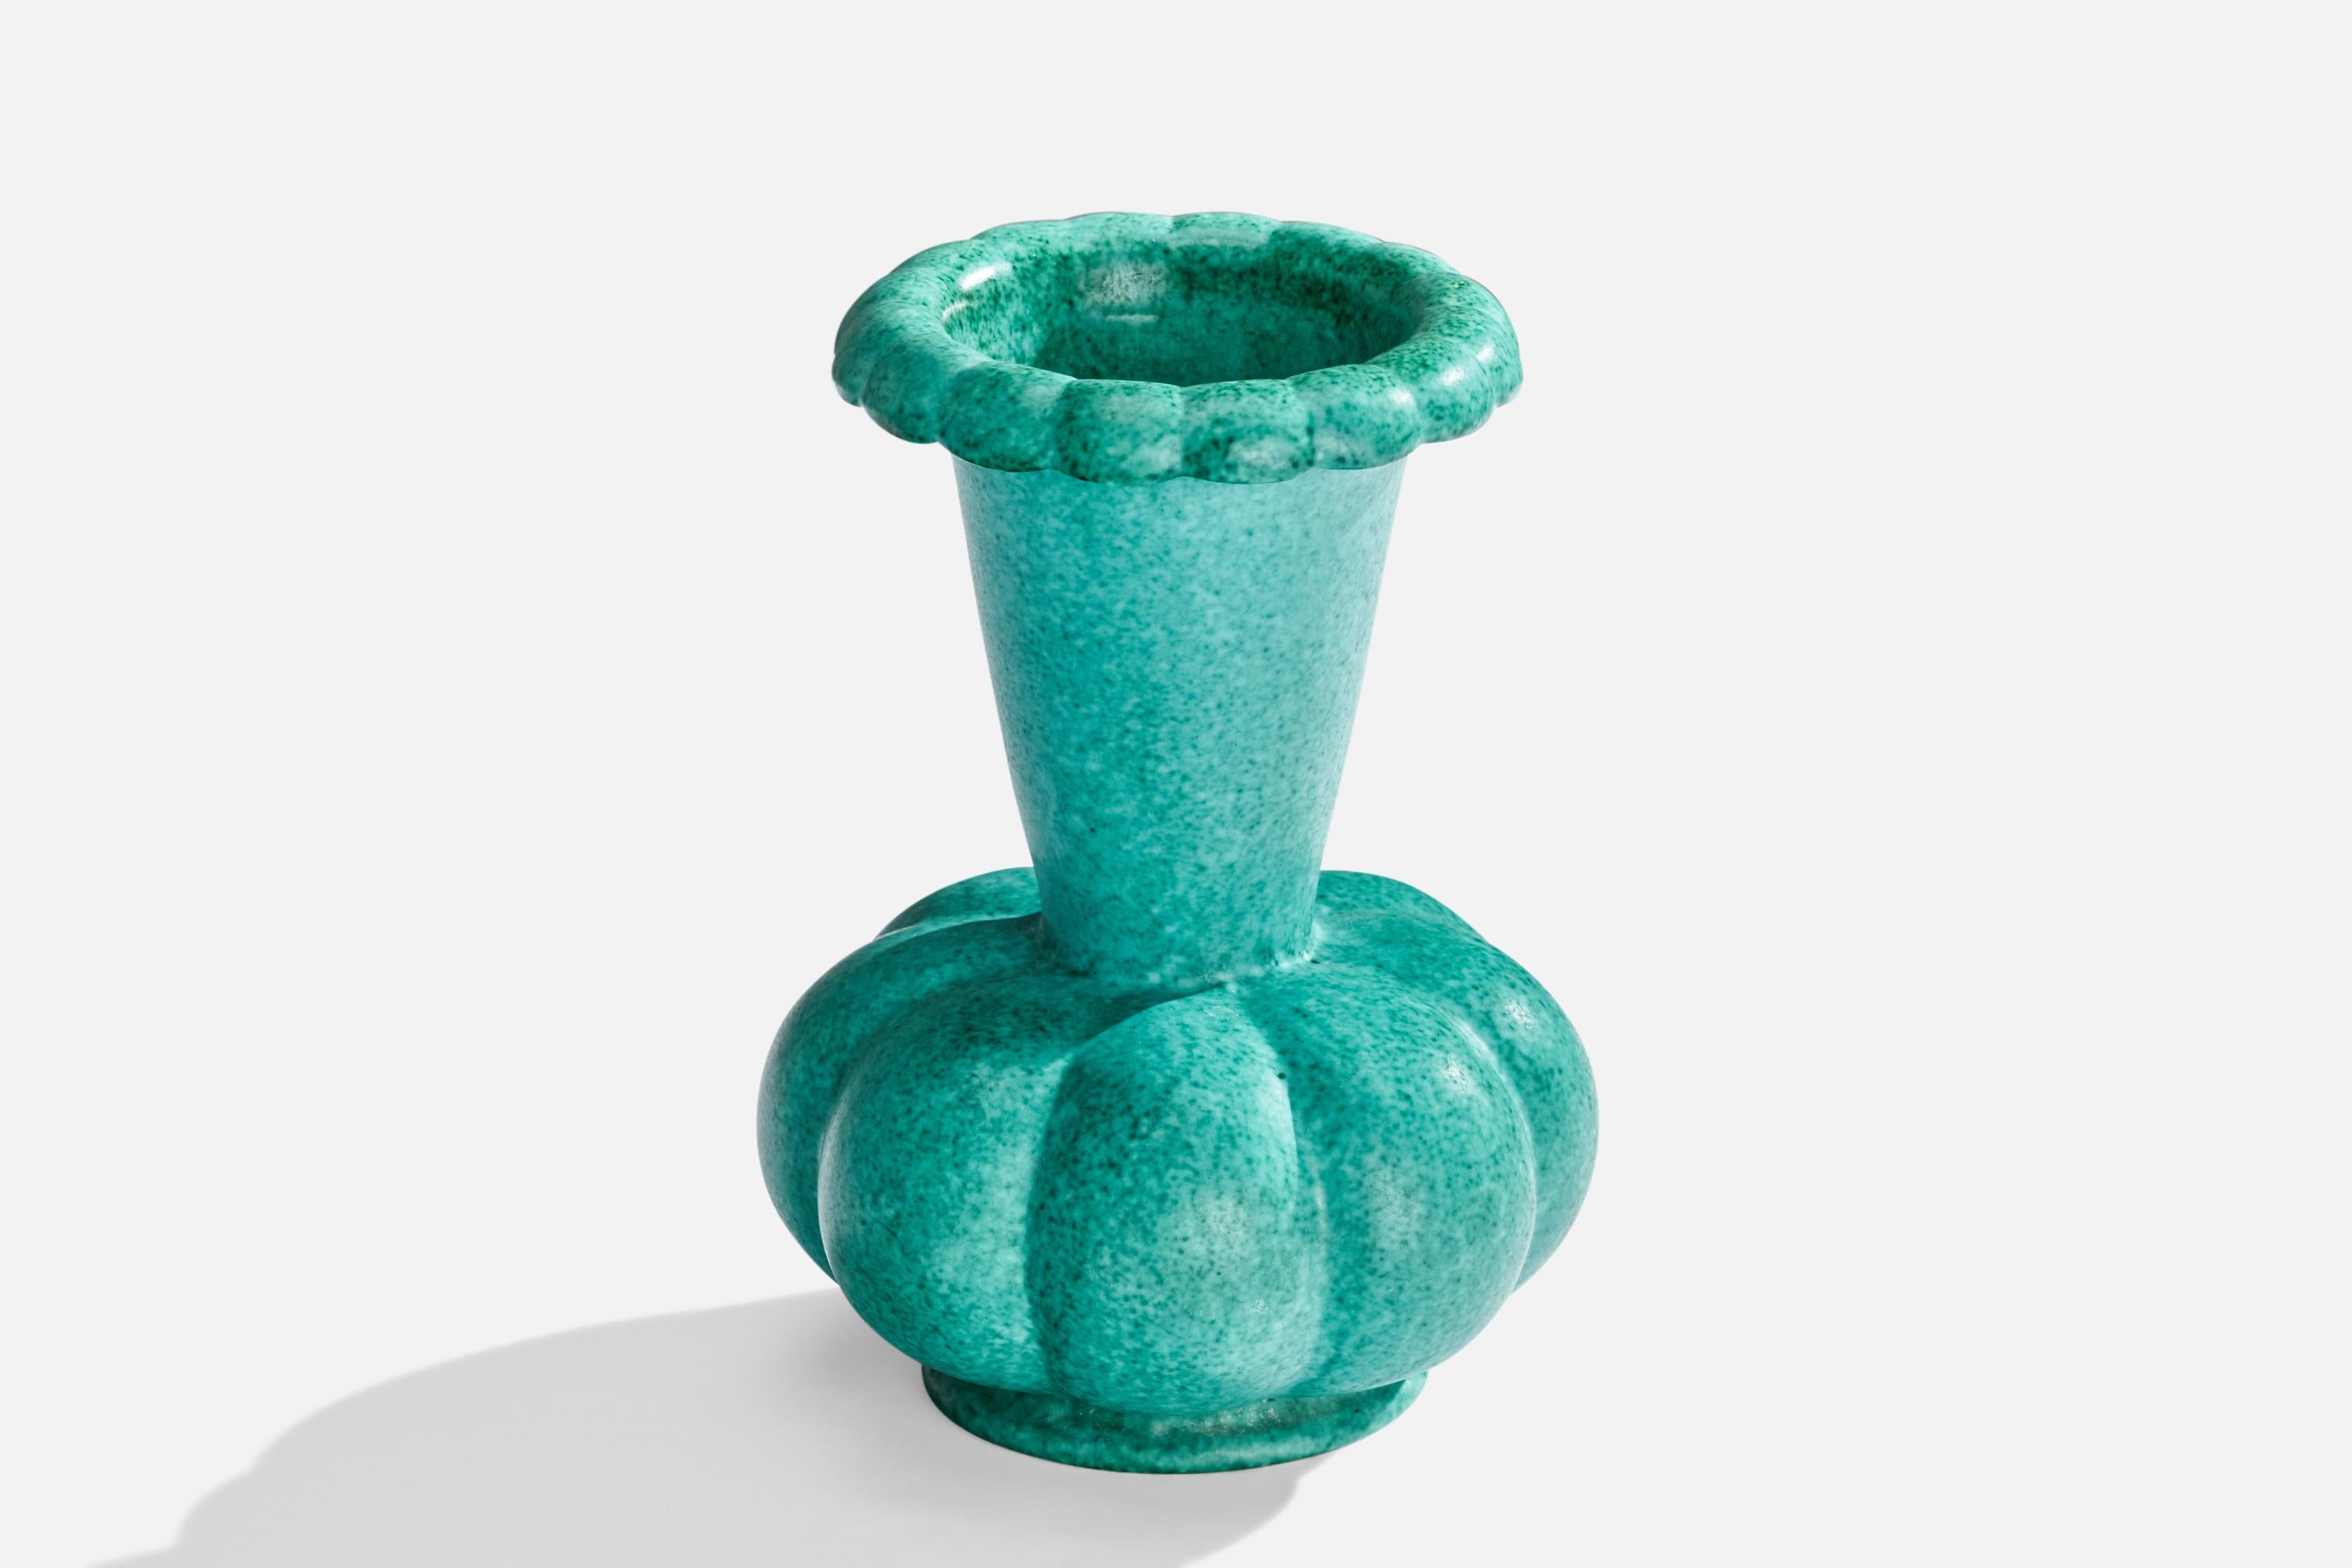 A blue-glazed ceramic vase designed by Arthur Percy and produced by Gefle, Sweden, 1930s.